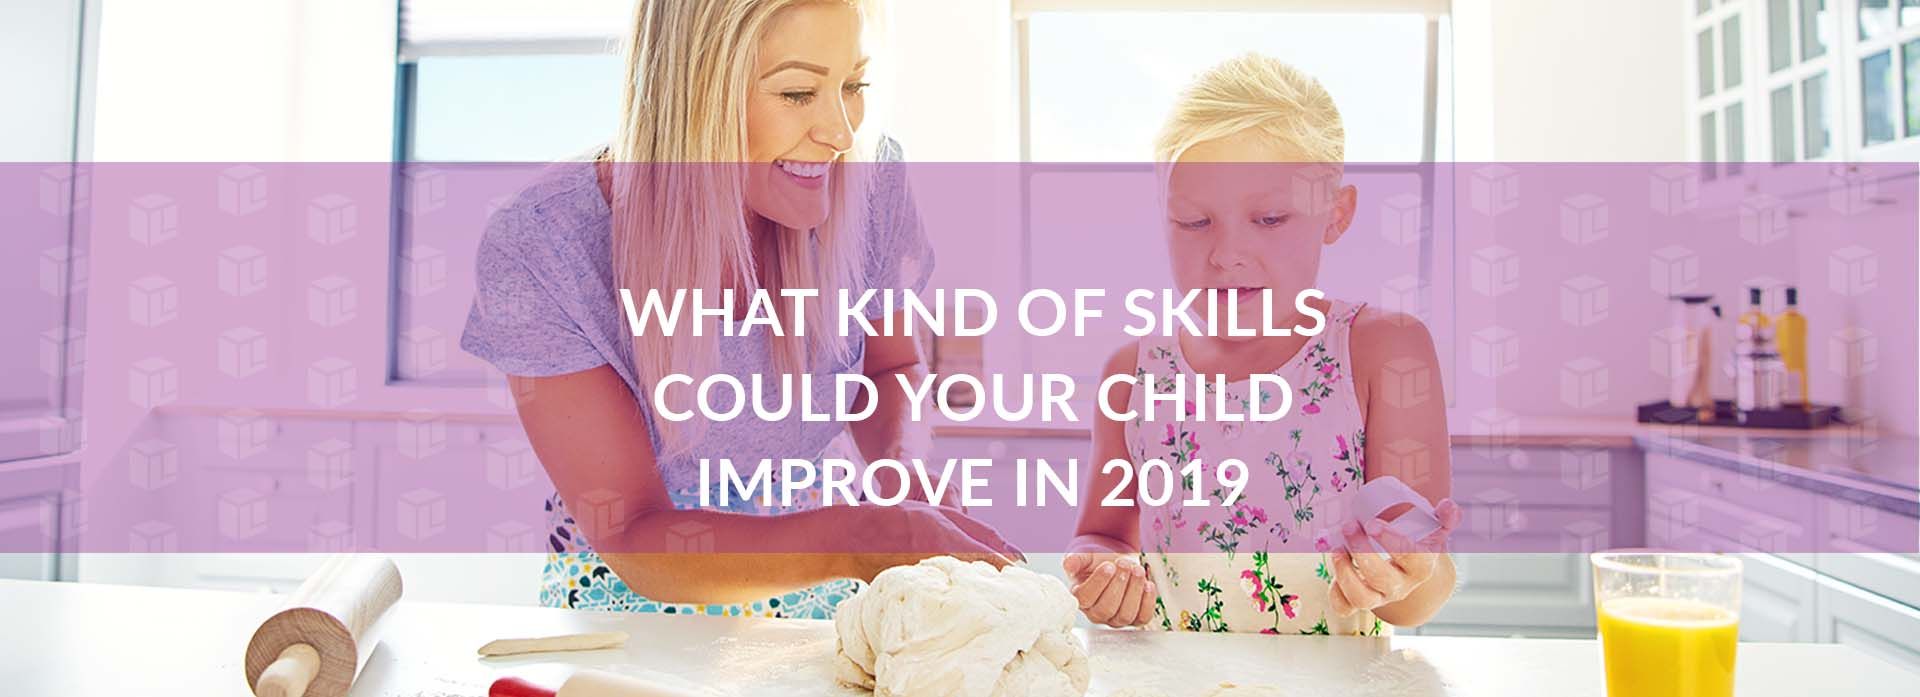 What Kind Of Skills Could Your Child Improve in 2019? What Kind Of Skills Could Your Child Improve in 2019? What Kind Of Skills Could Your Child Improve in 2019? What Kind Of Skills Could Your Child Improve in 2019?